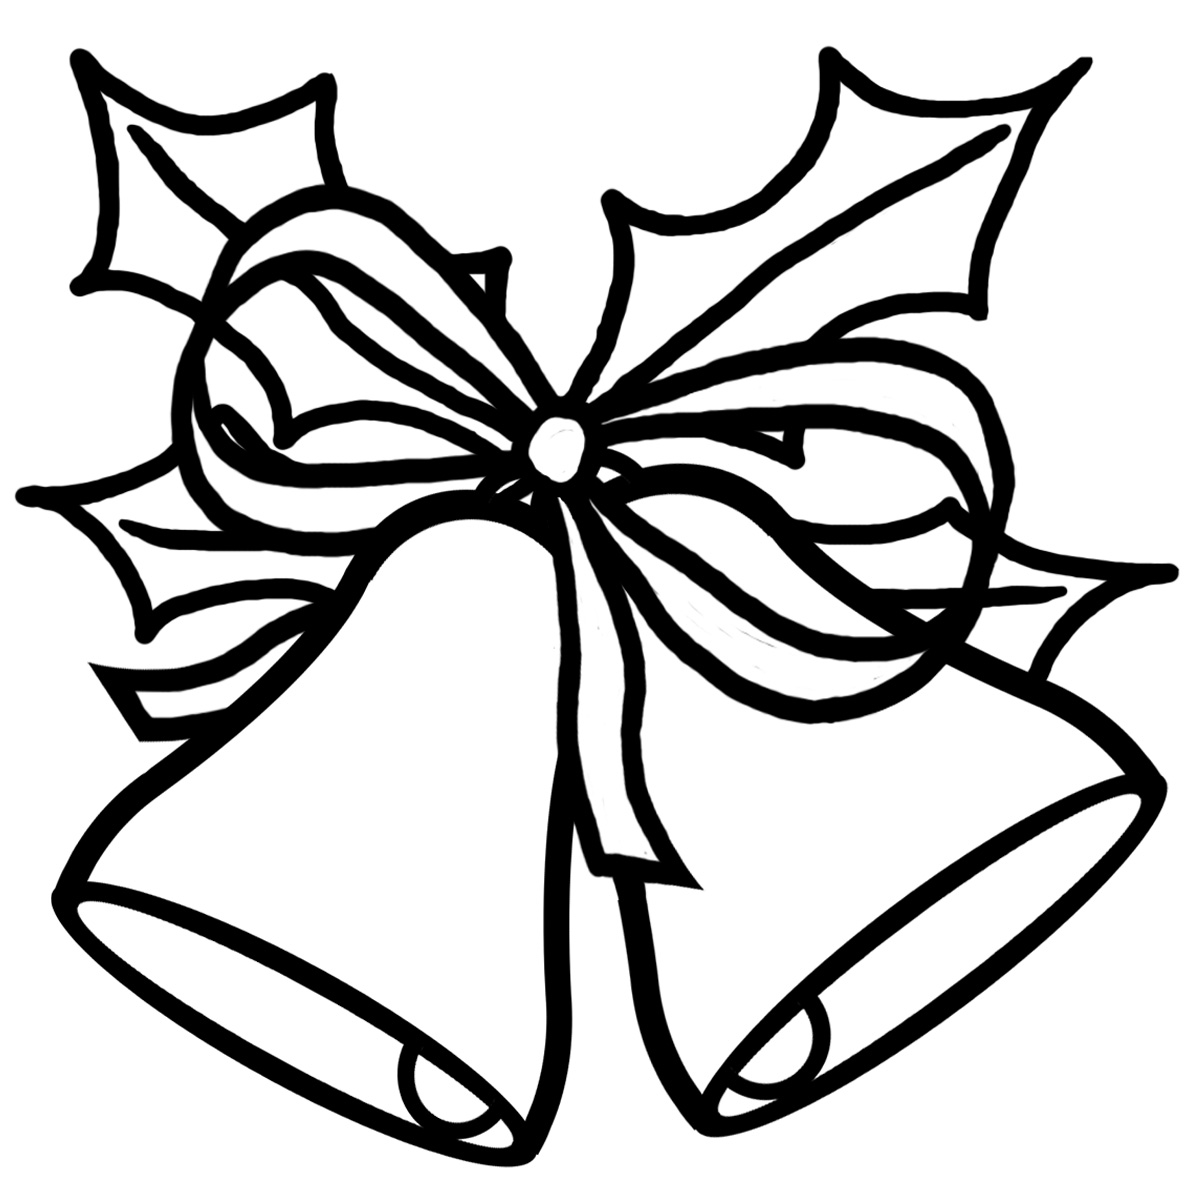 heater clipart black and white christmas